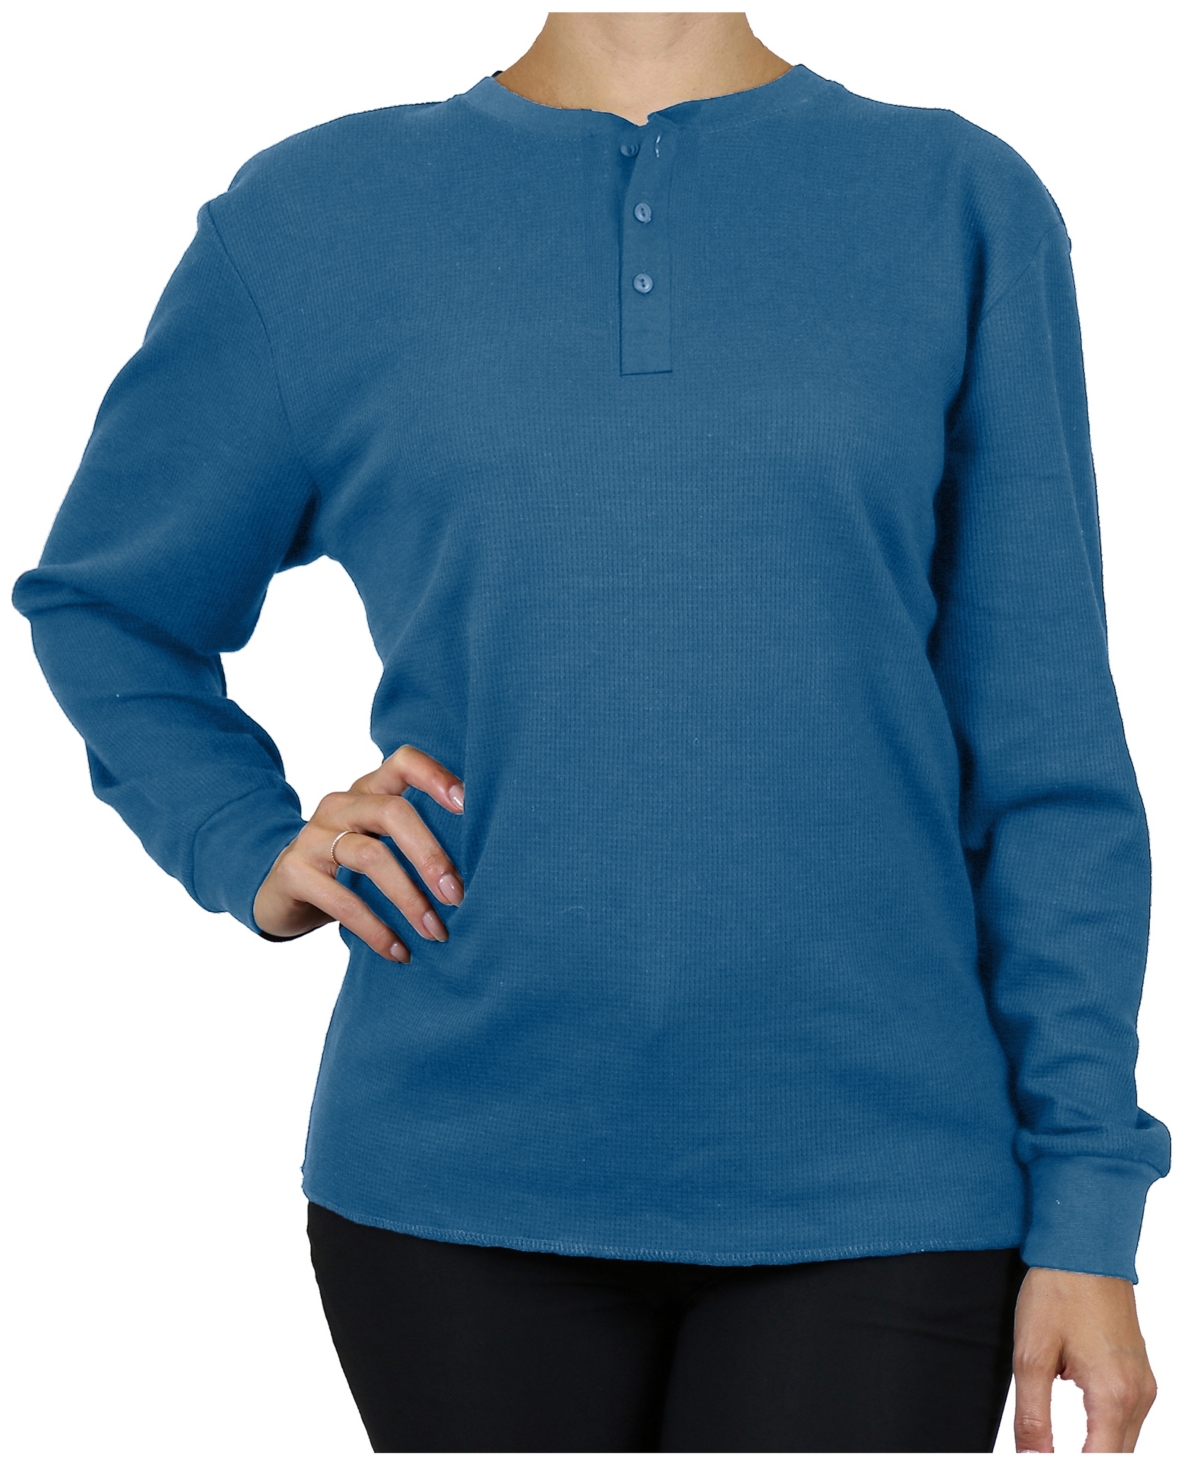 Galaxy By Harvic Women's Oversize Loose Fitting Waffle-knit Henley Thermal Sweater In Medium Blue